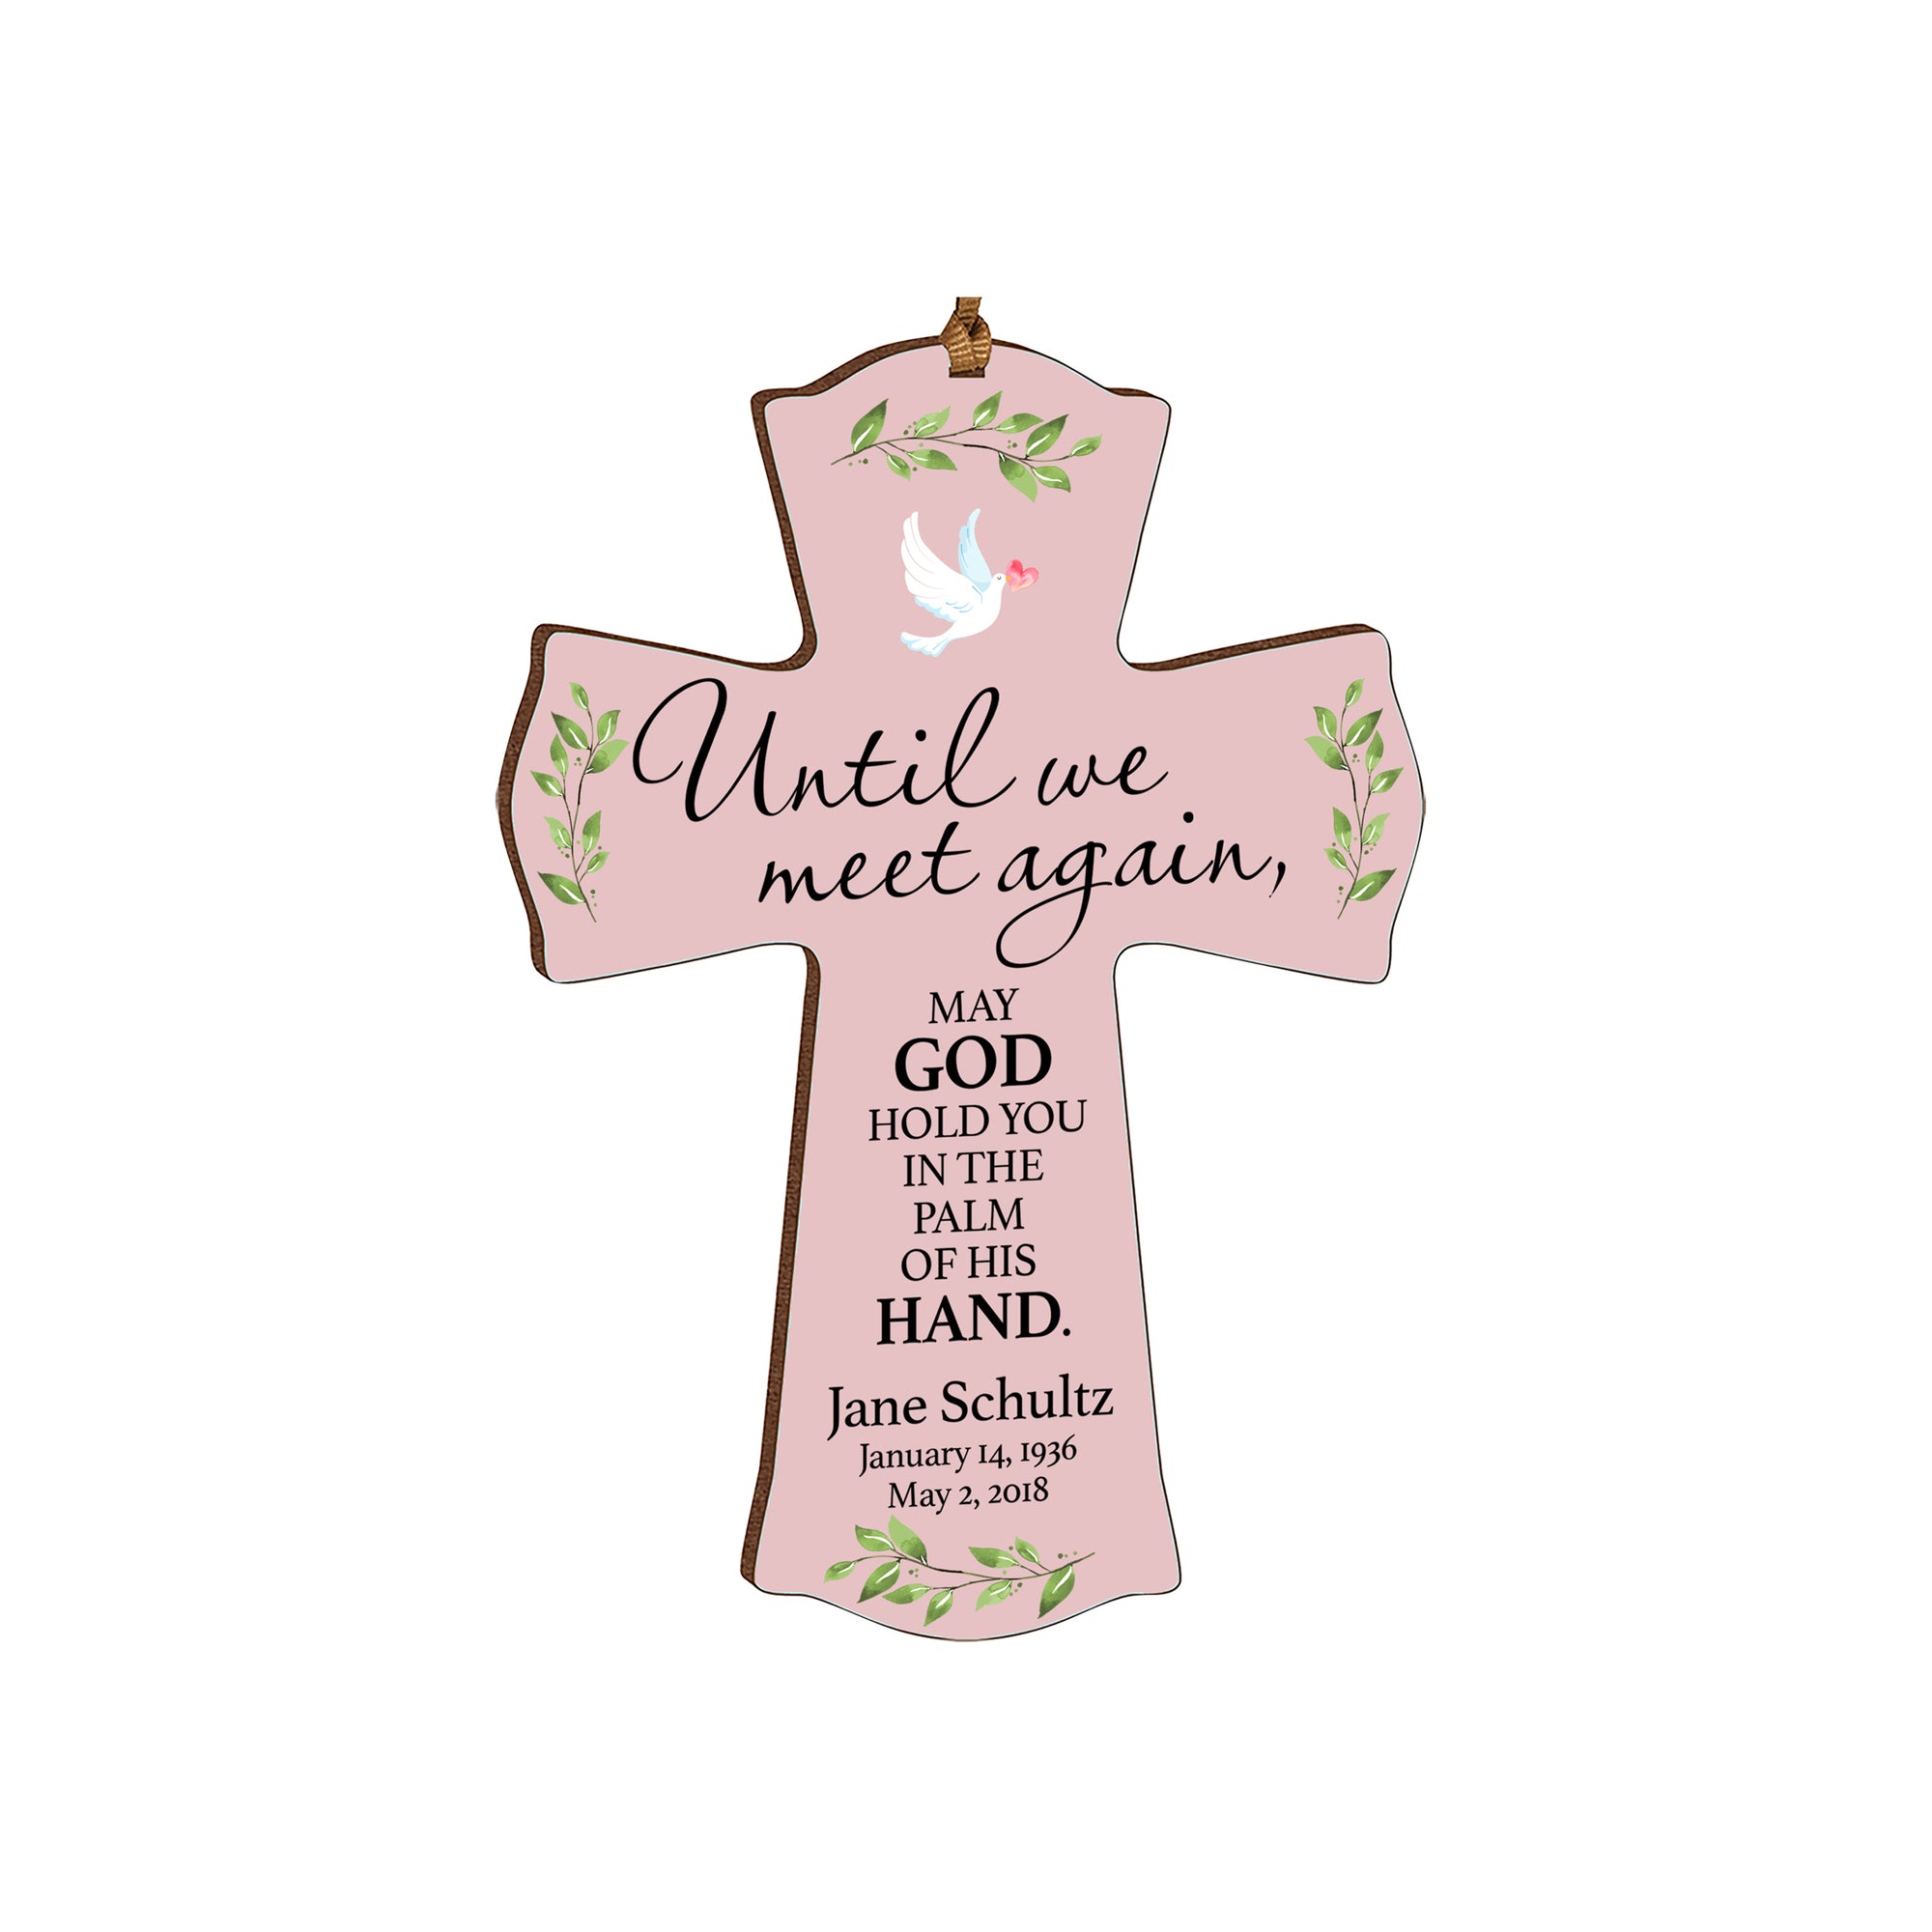 Lifesong Milestones Custom Memorial Wooden Cross 4x6 Until We Meet Condolence Funeral Remembrance In Loving Memory Bereavement Gift for Loss of Loved One.